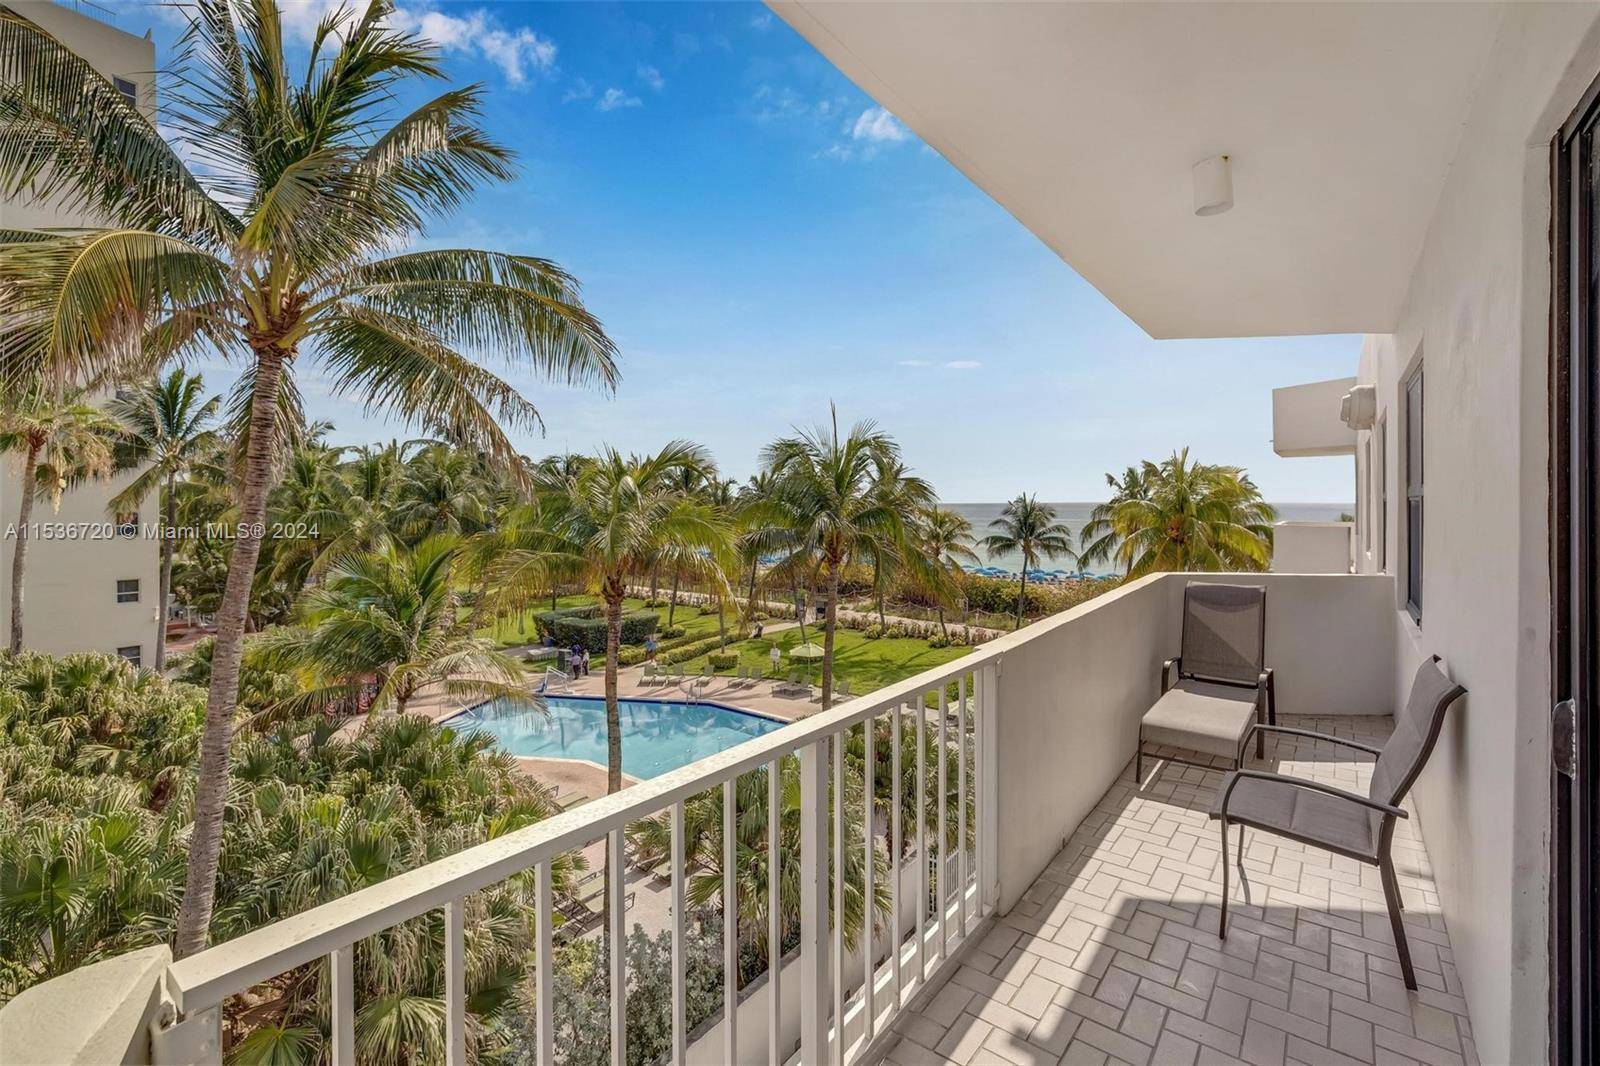 Sunlit beachfront condo featuring a spacious balcony with an ocean view, washer dryer in unit, renovated kitchen and bathrooms, tile floor throughout, a walk in closet in the bedroom, and ...